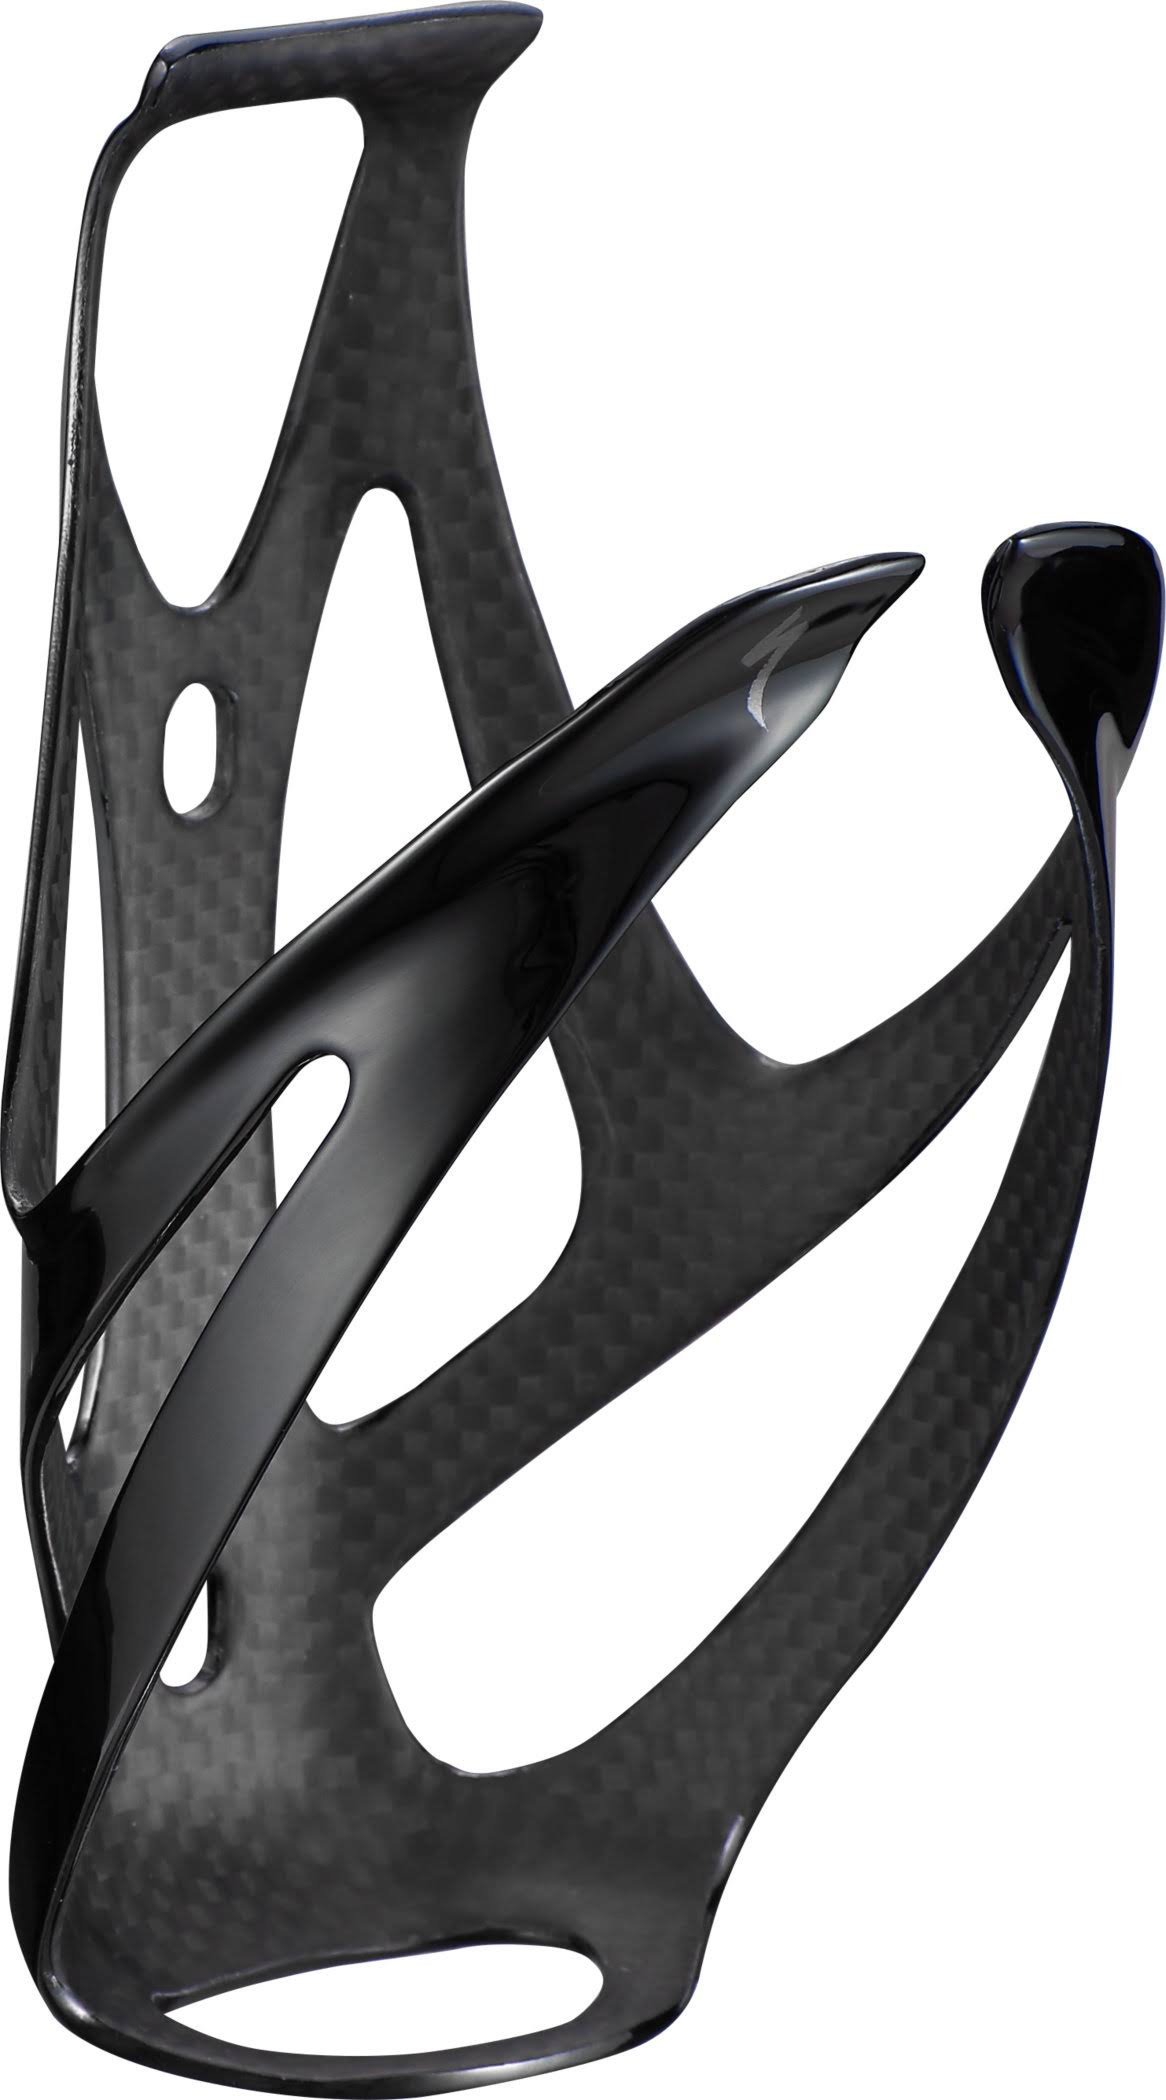 Specialized S-Works Carbon Rib Cage III Carbon/ Black